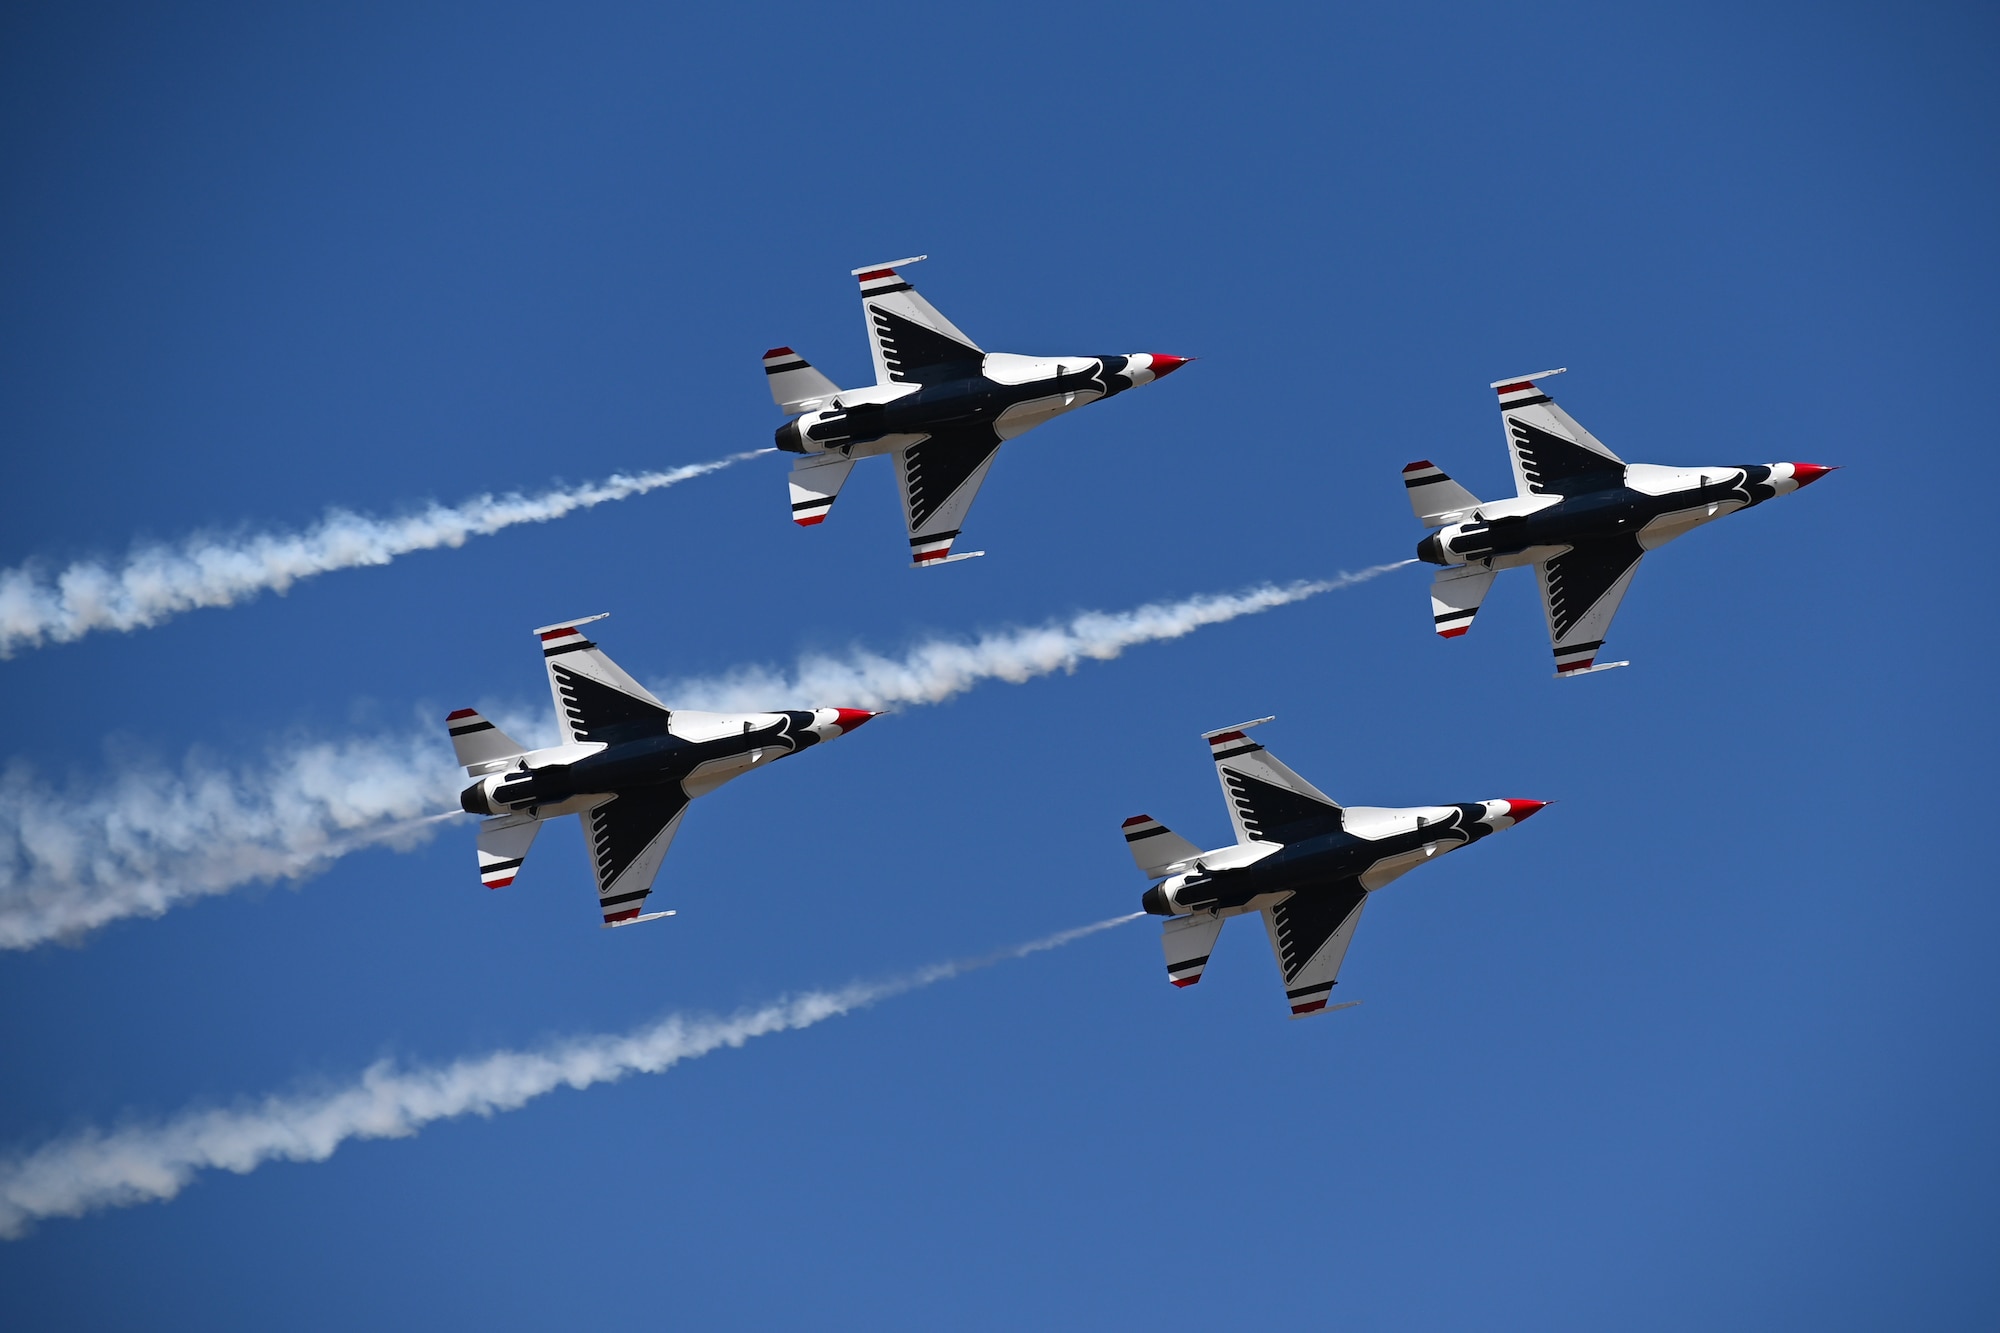 The USAF Thunderbird aircraft performers aerial maneuvers during the Wings Over Columbus 2022 Airshow March 25, 2022, on Columbus Air Force Base, MS. Eight officers serve as the Thunderbirds highly experienced pilots, and four serve in critical roles from medical support to public affairs. (U.S. Air Force photo by Senior Airman Jake Jacobsen)